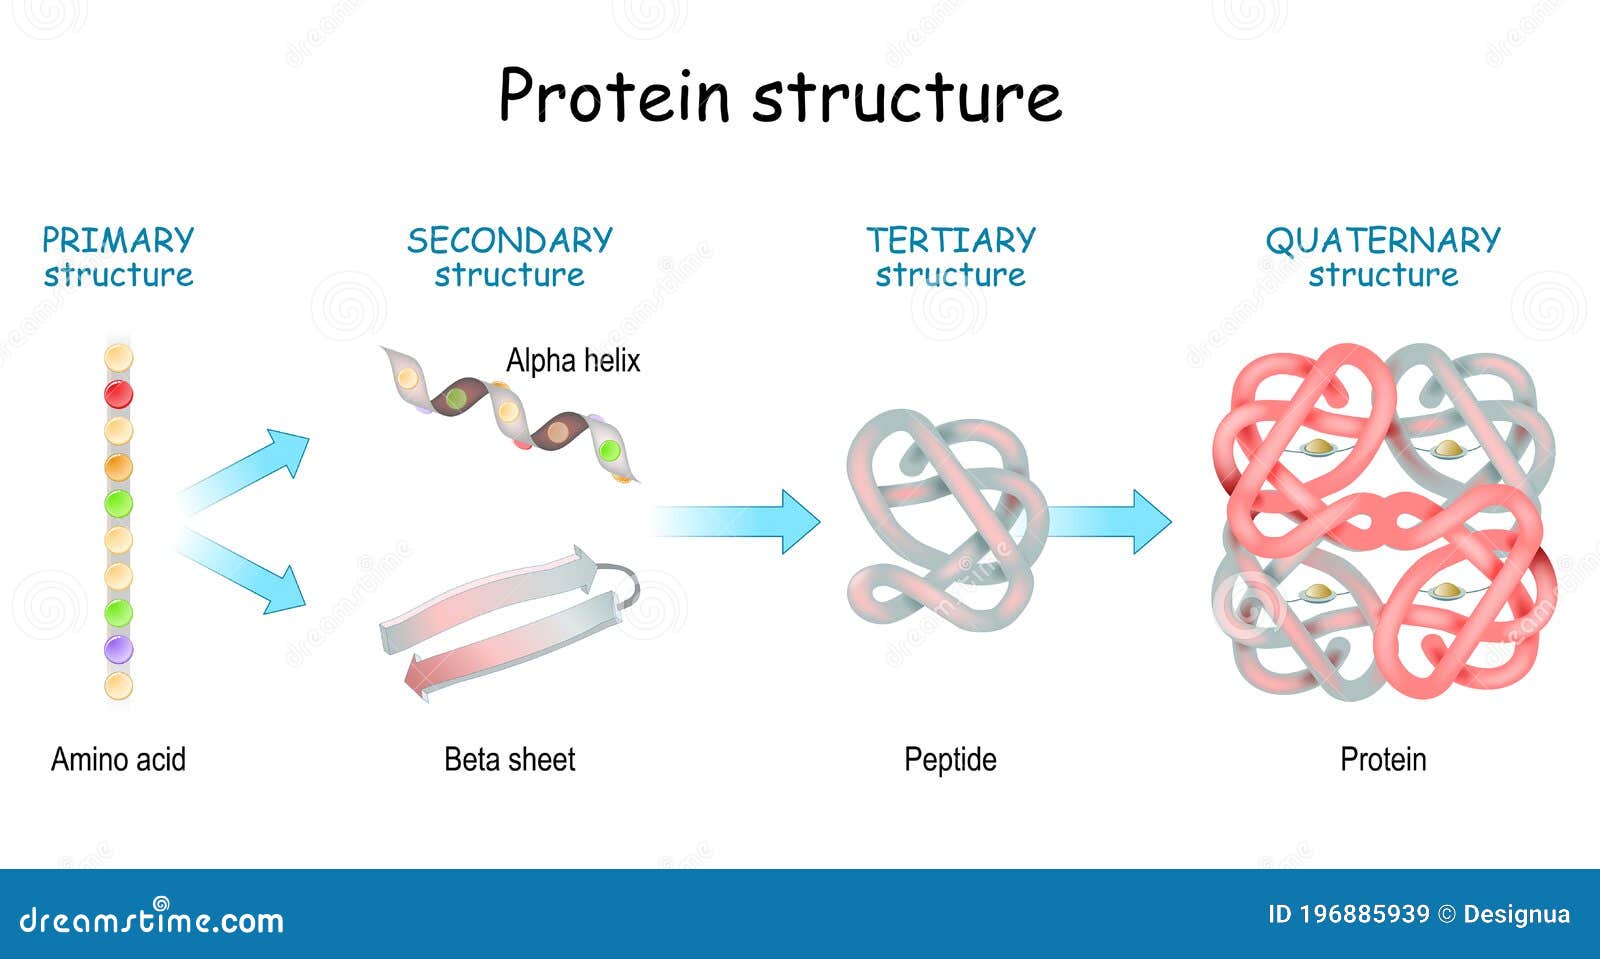 protein structure levels. from amino acid to alpha helix, beta sheet, peptide, and protein molecule